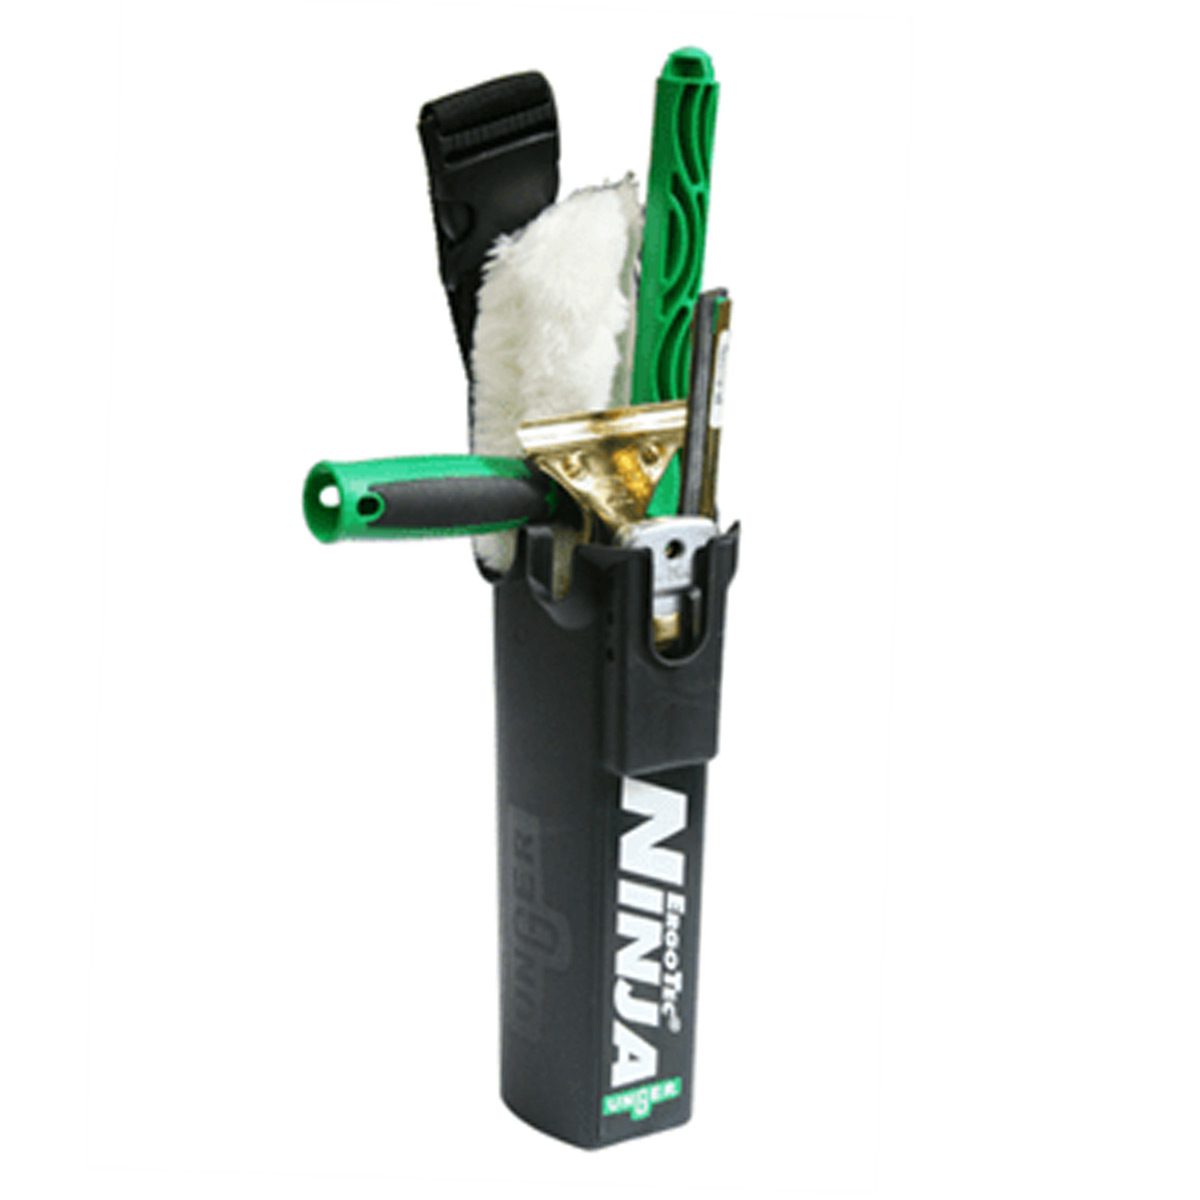 cleaning-equipment-squeegees-and-window-cleaning-unger-ninja-bucket-on-belt-durable-plastic-holder-for-2-squeegees-1-washer-1-saftey-scraper-clip-lock-for-quick-fastening-vjs-distributors-U-BB010